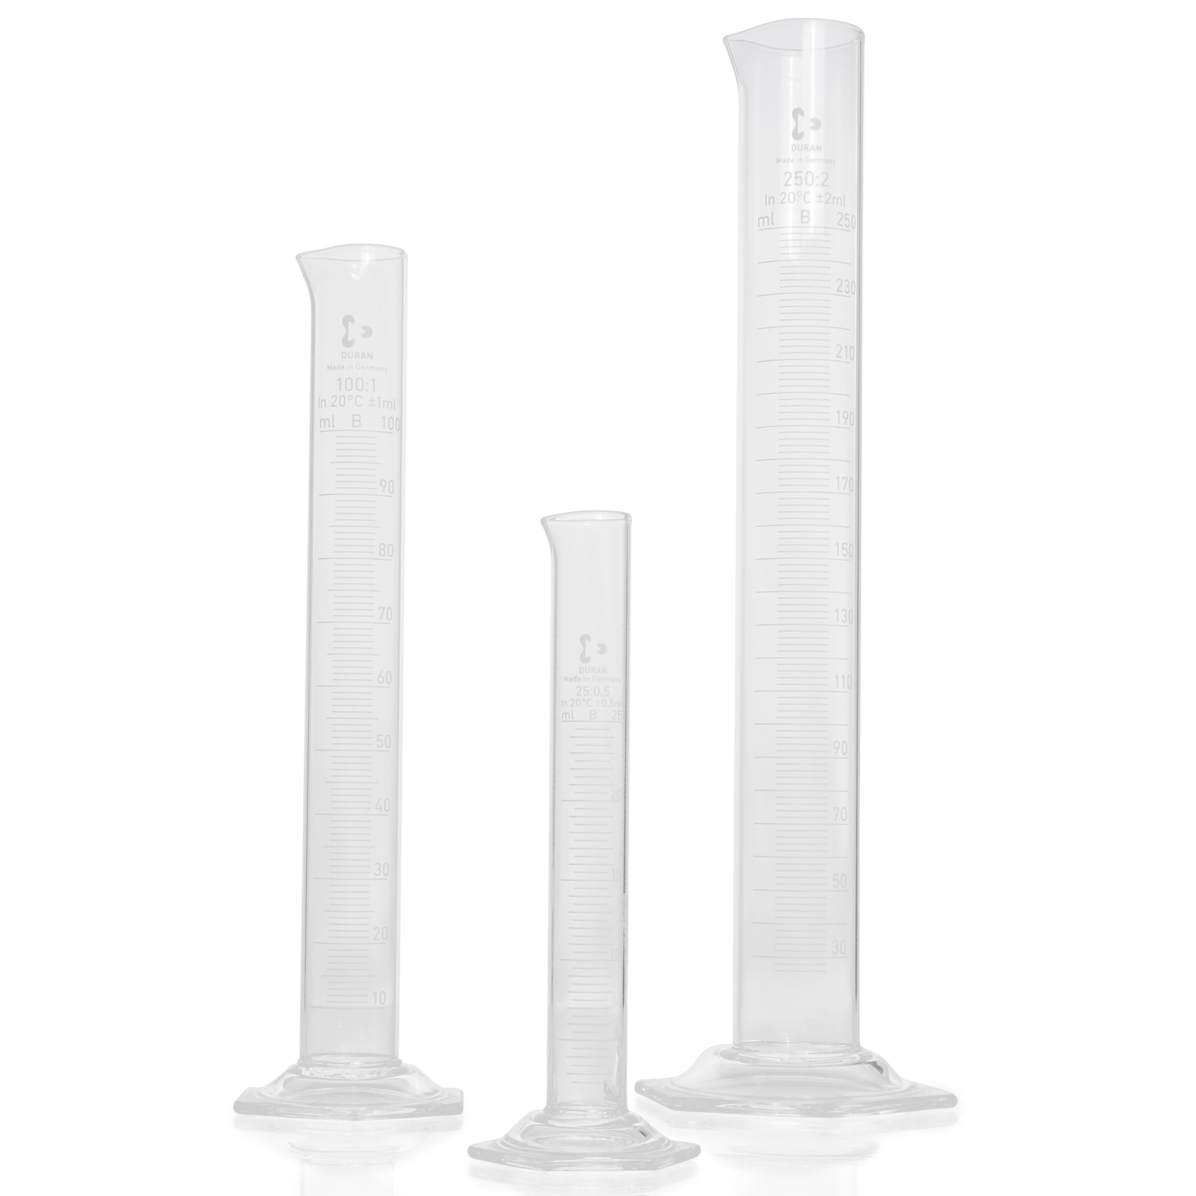 ABML 13334981 Measuring cylinder glass - 5ml